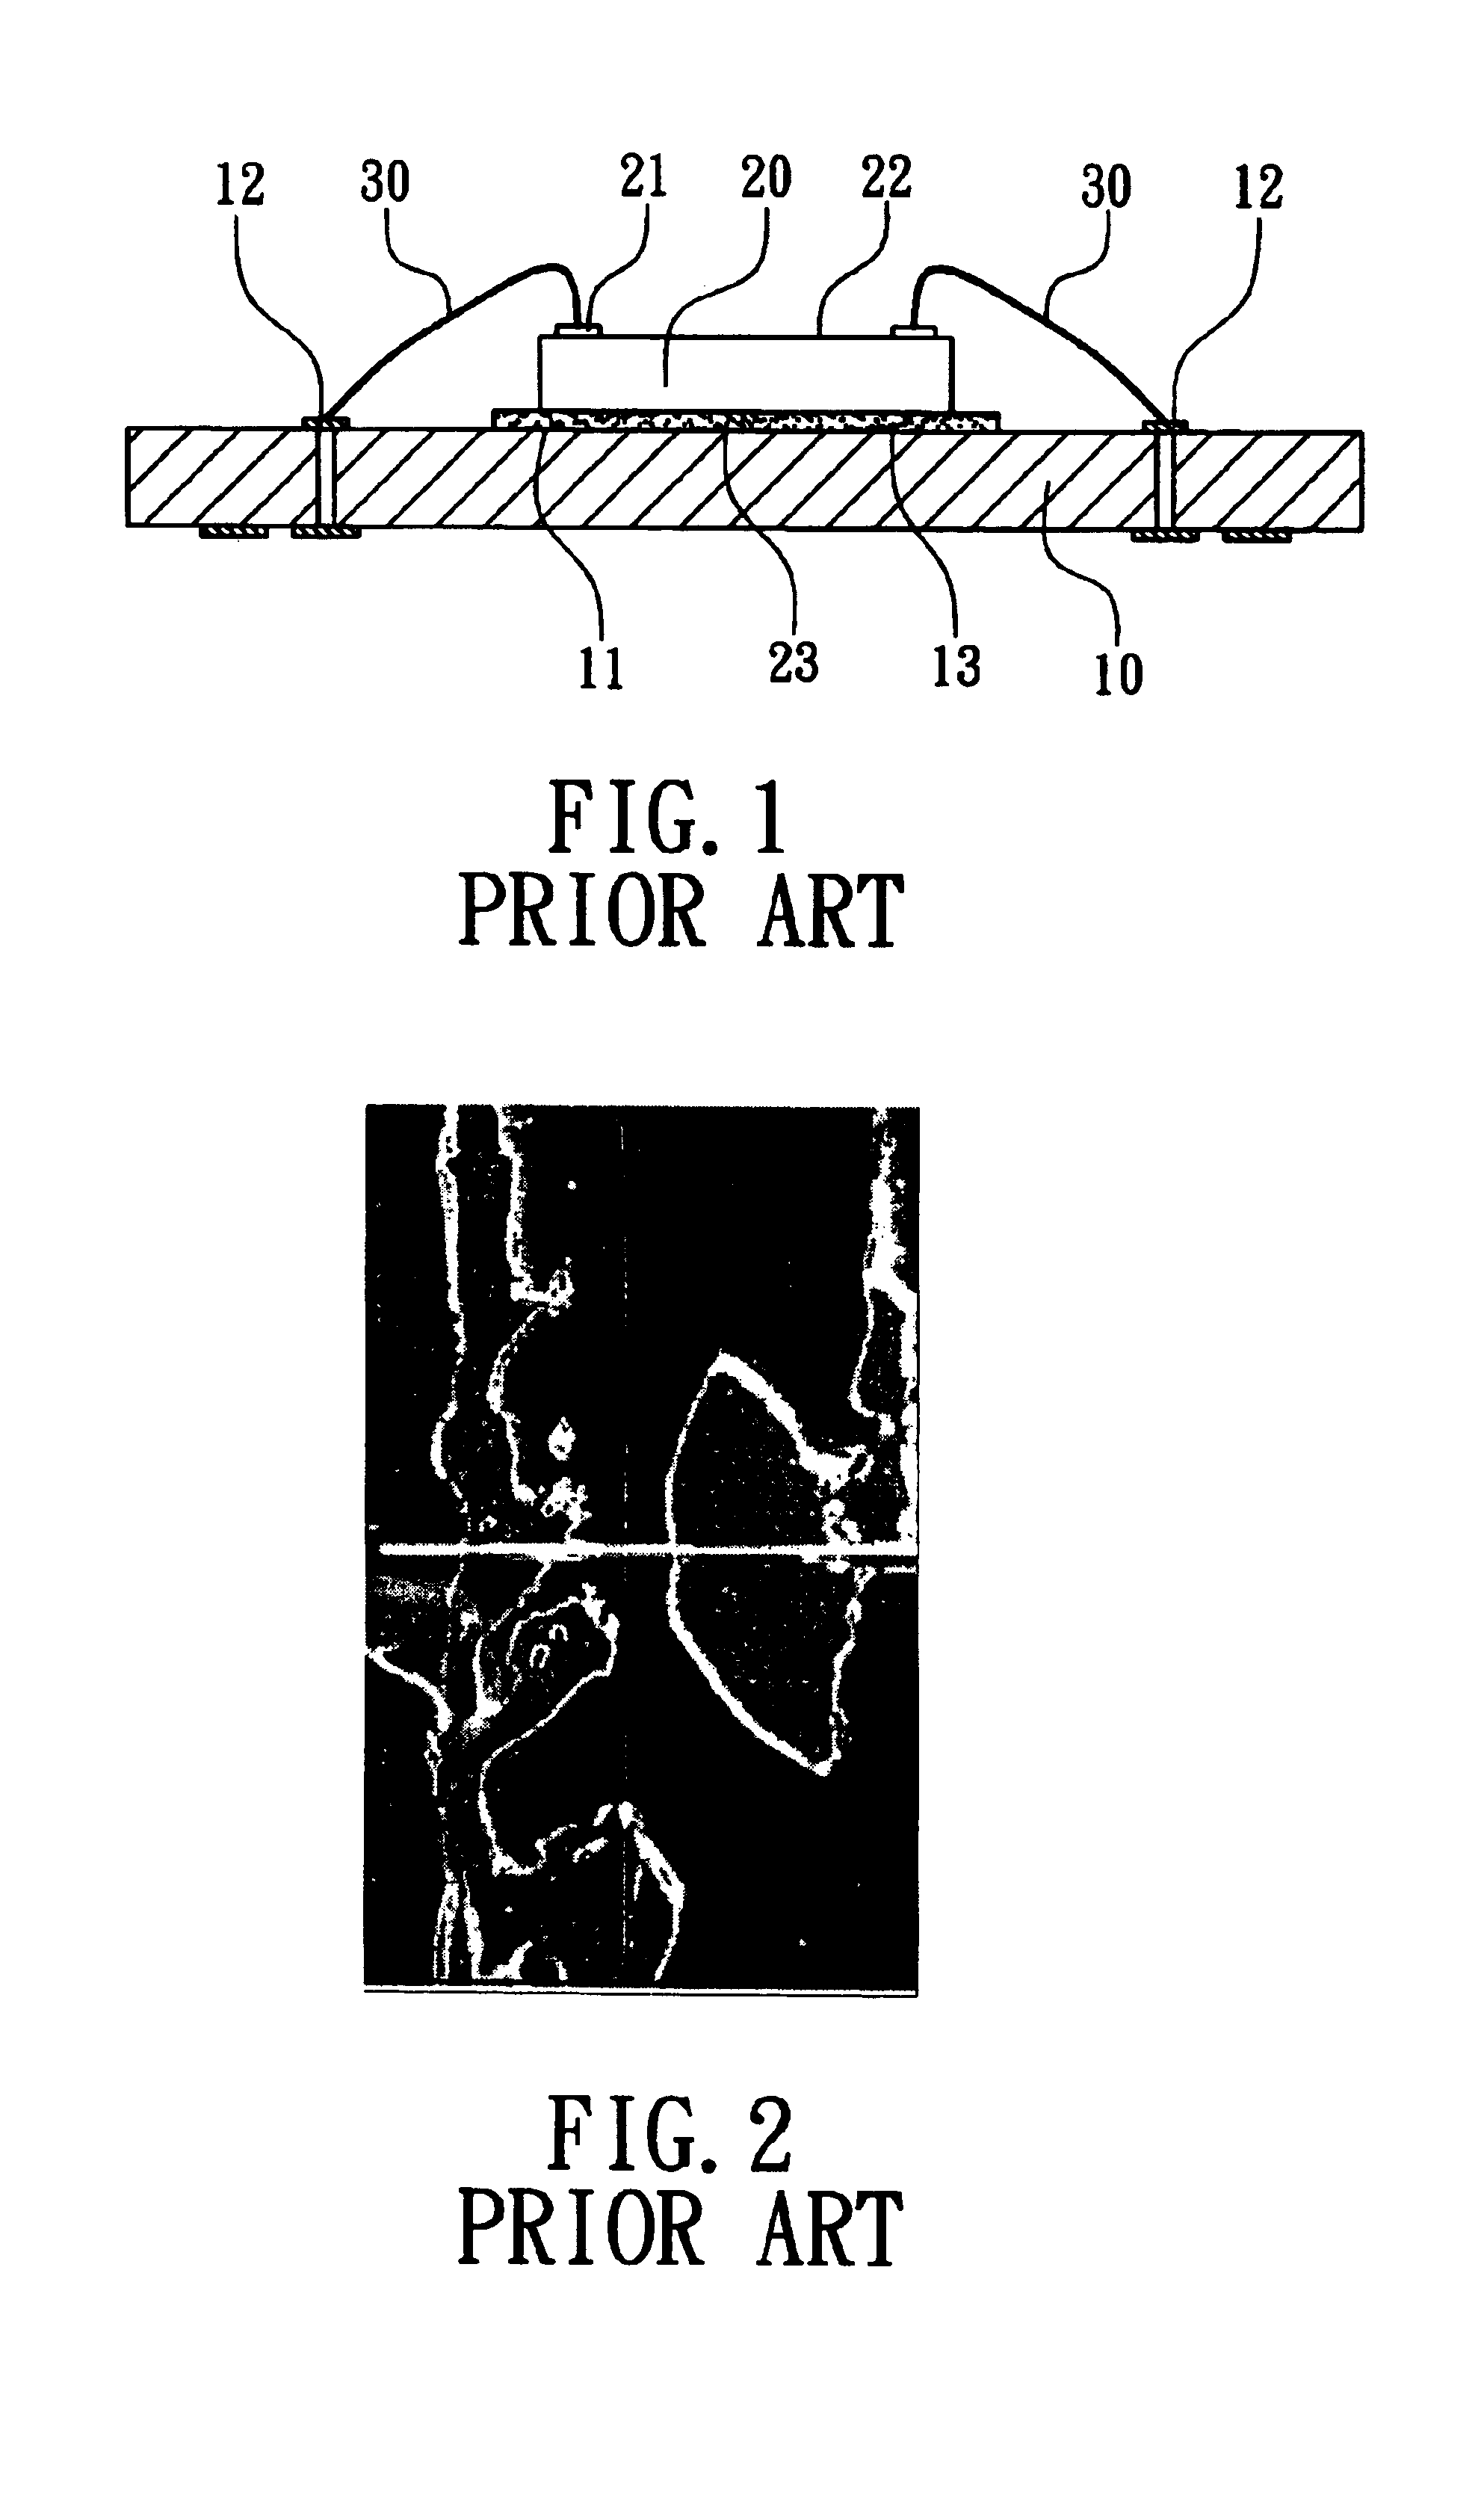 Integrated circuit packaging for improving effective chip-bonding area